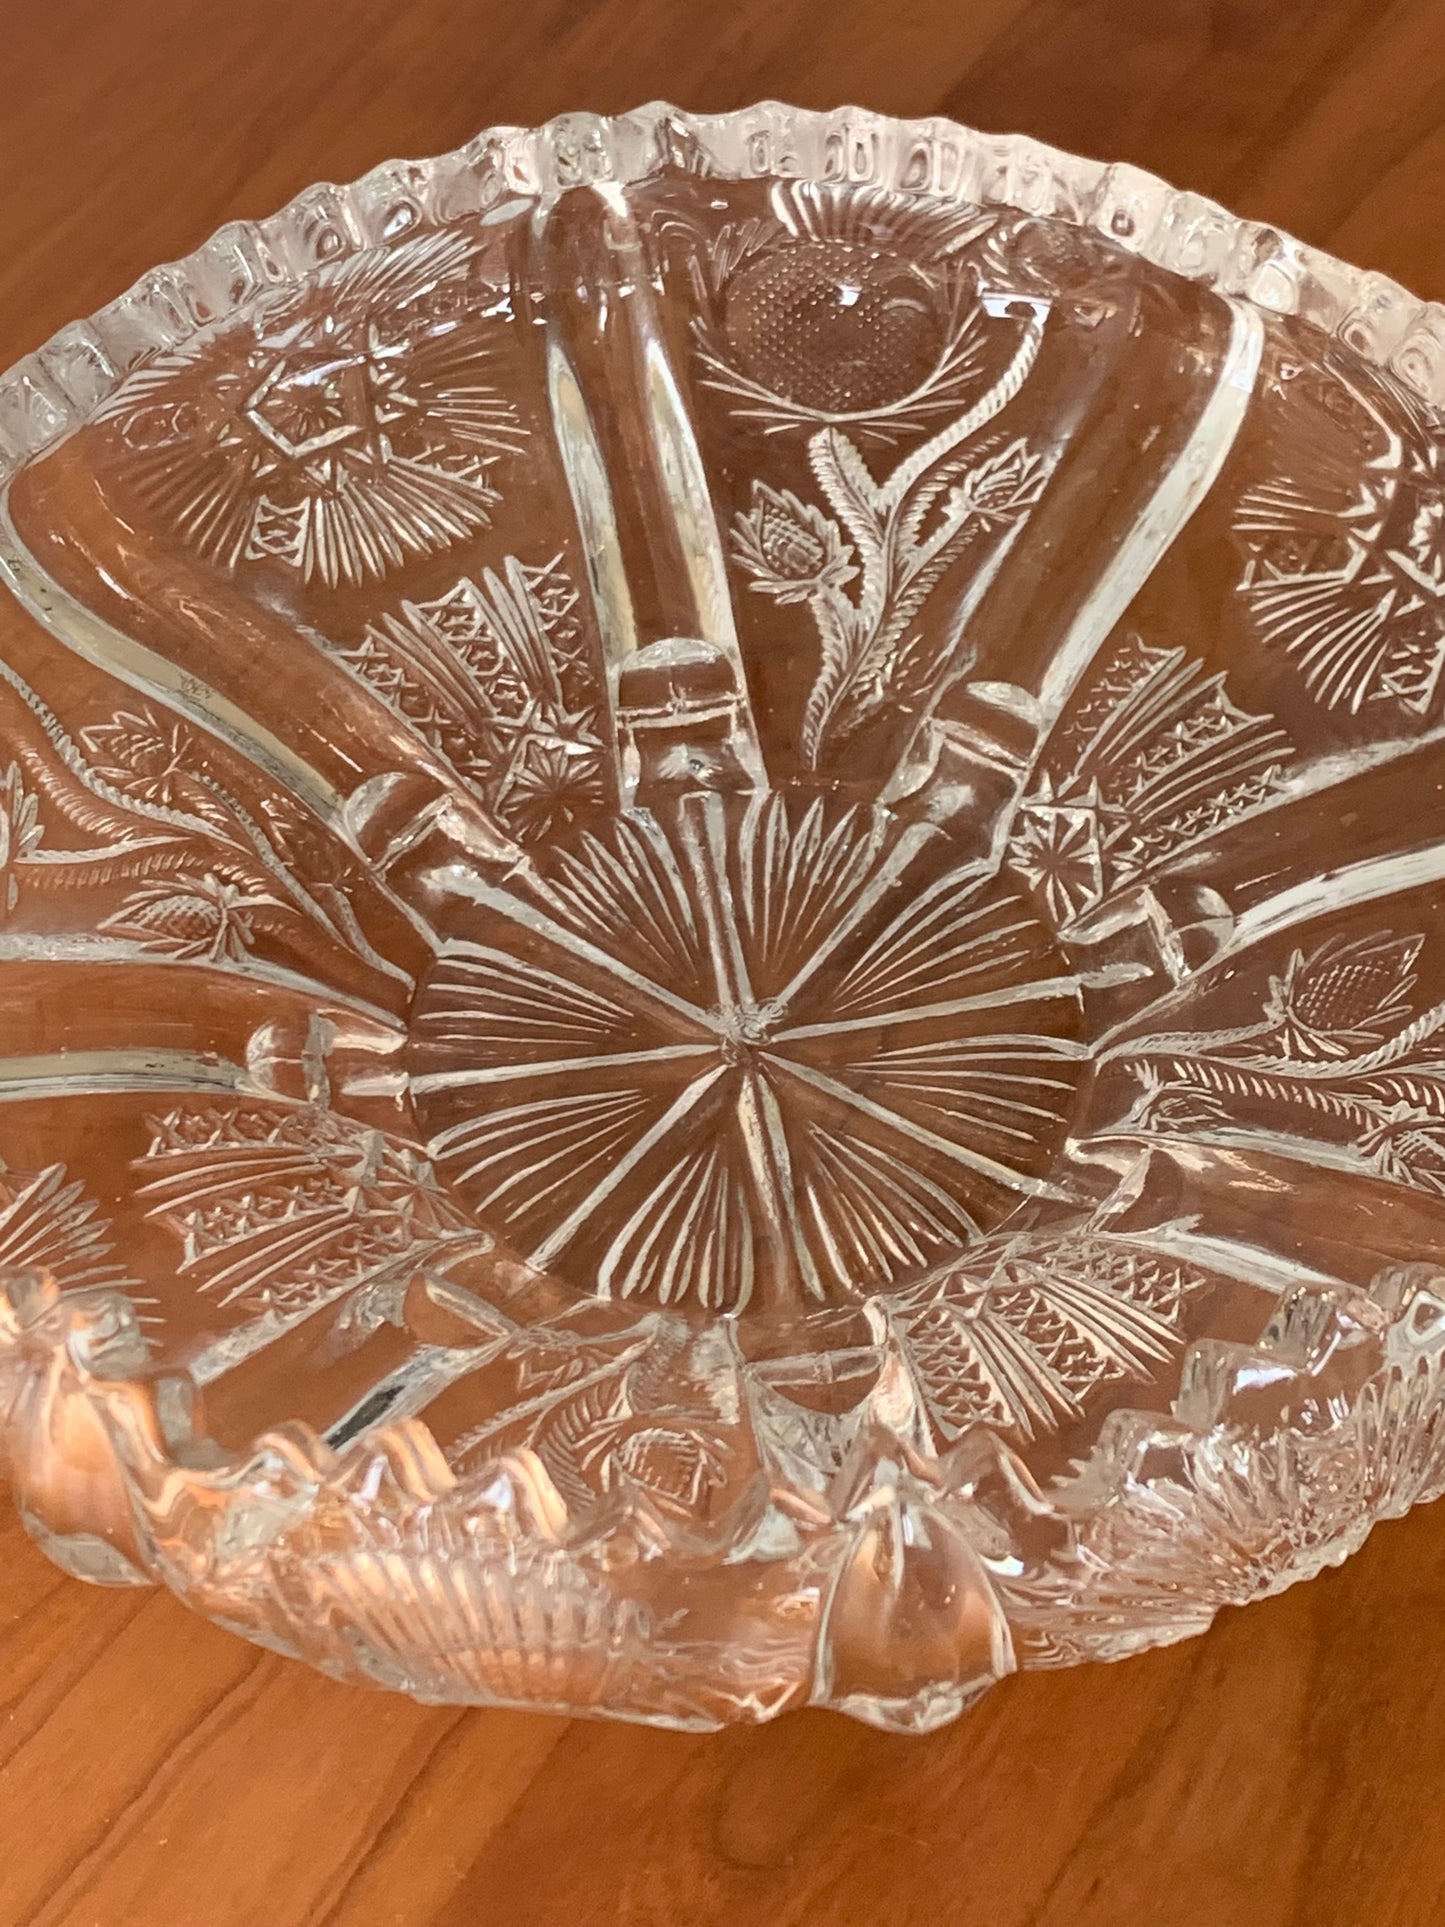 Higbee Pressed Glass Thistle Pattern Serving Bowl